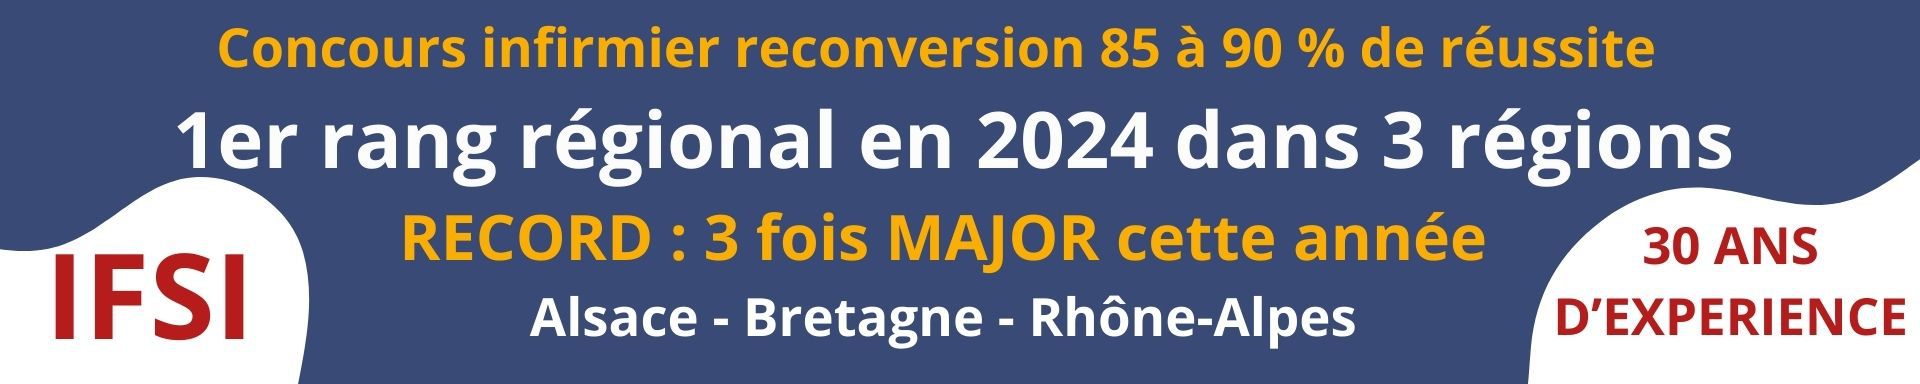 annales concours infirmiere 2020